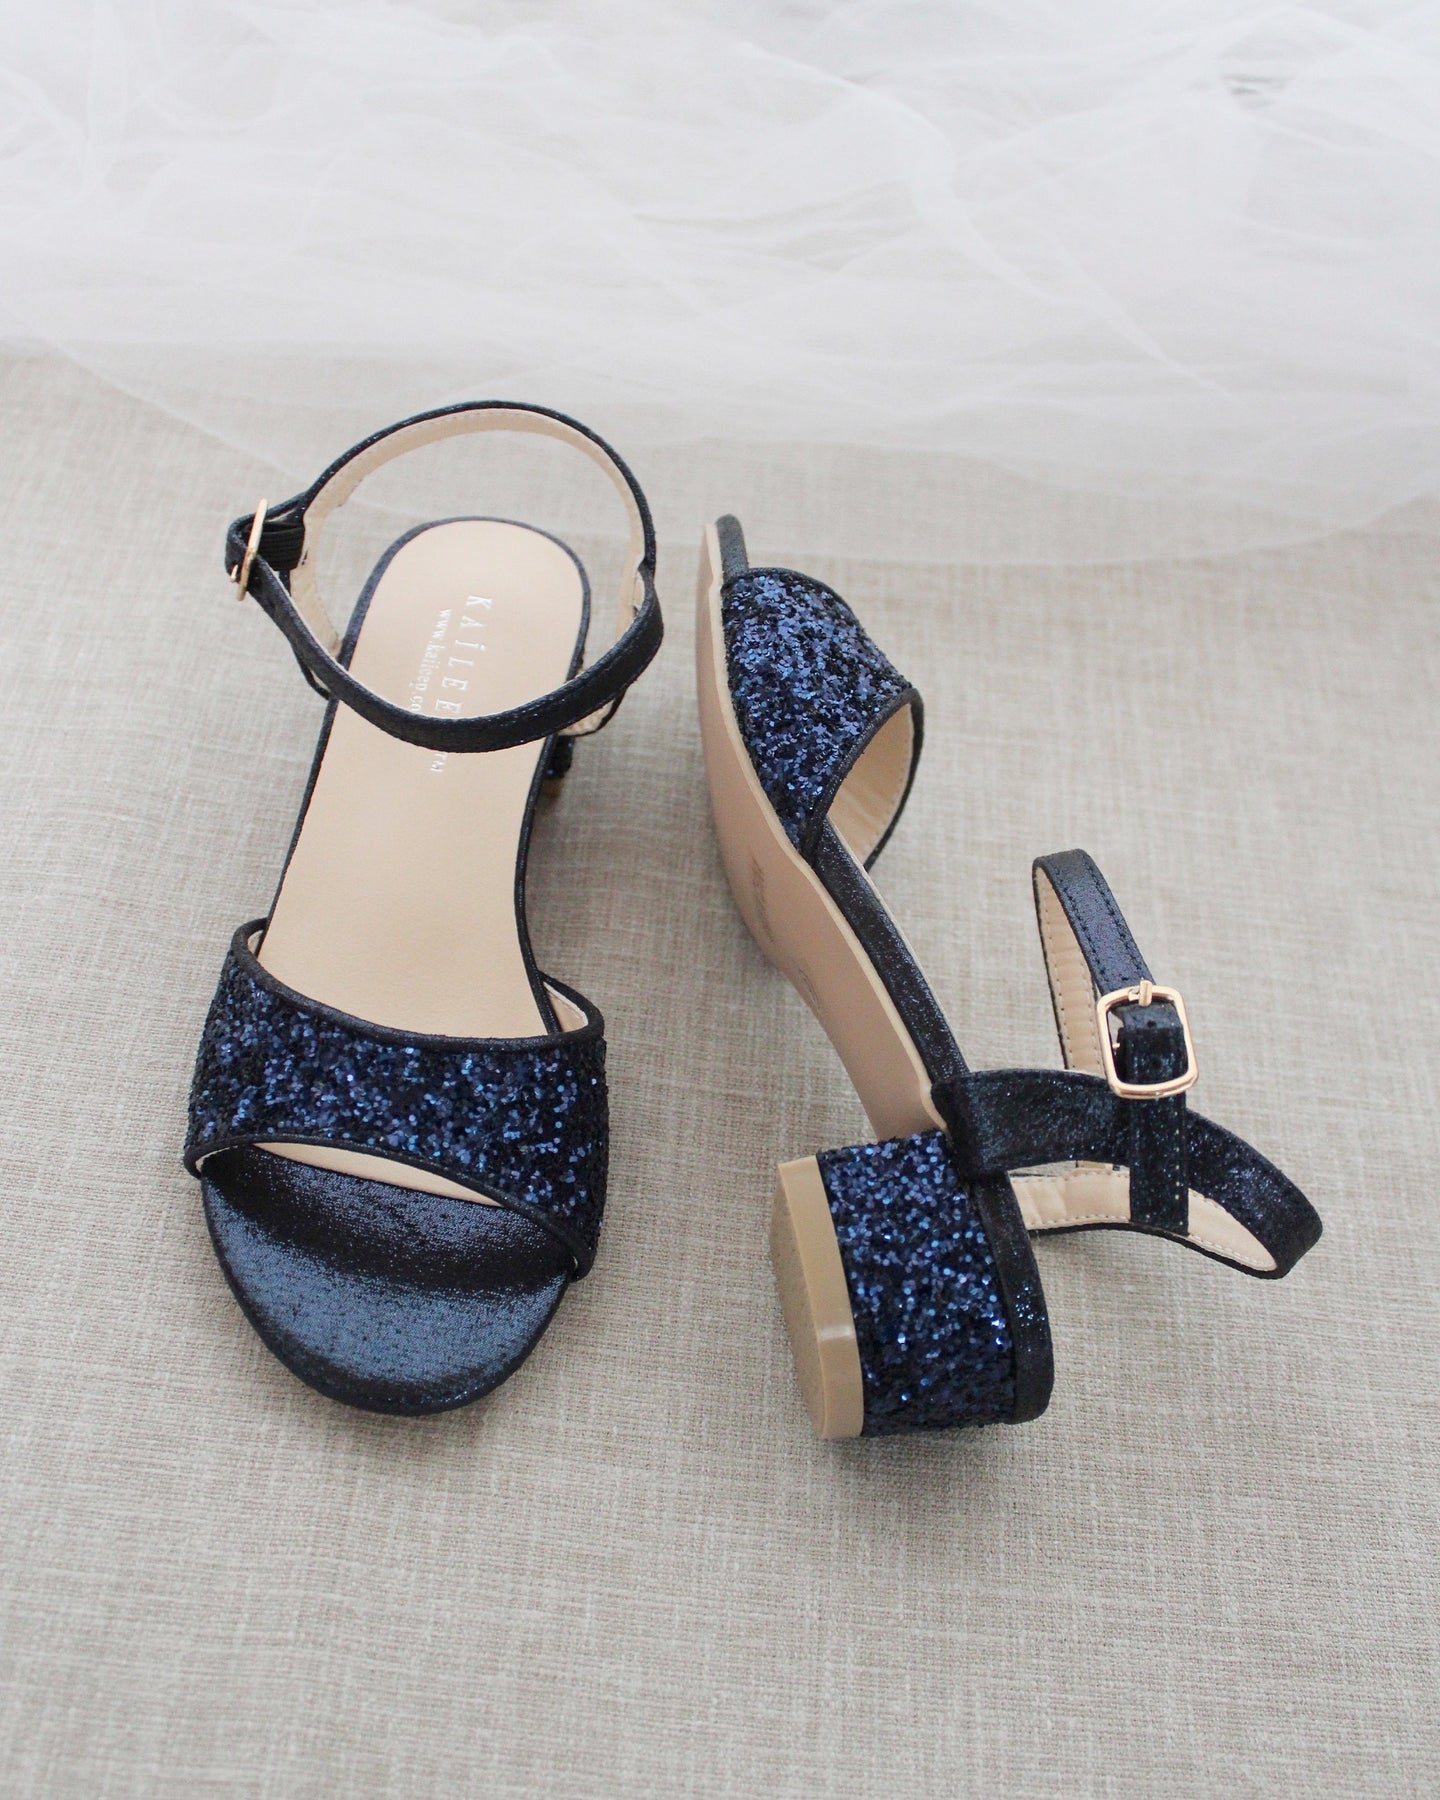 Kate Spade Licorice Too navy blue glitter pumps 8 perfect wedding shoes 💙  | eBay